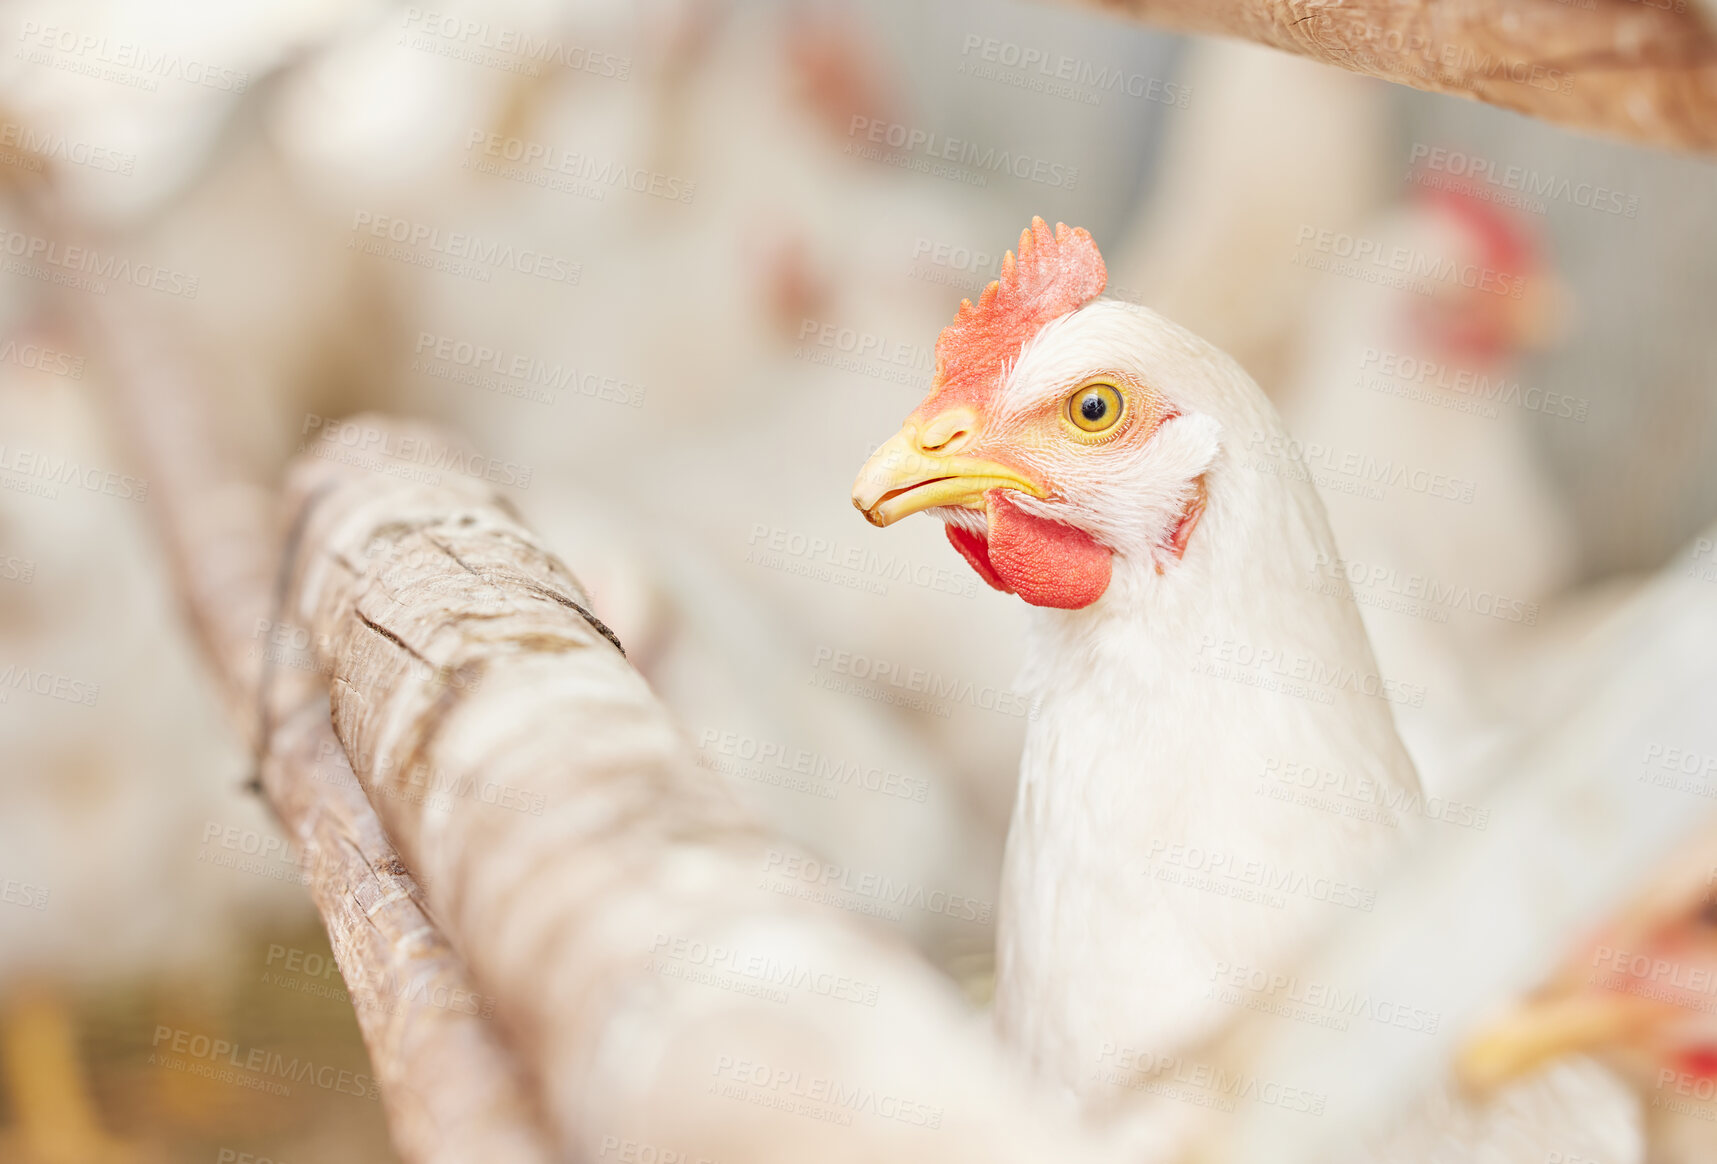 Buy stock photo Shot of chickens on a farm